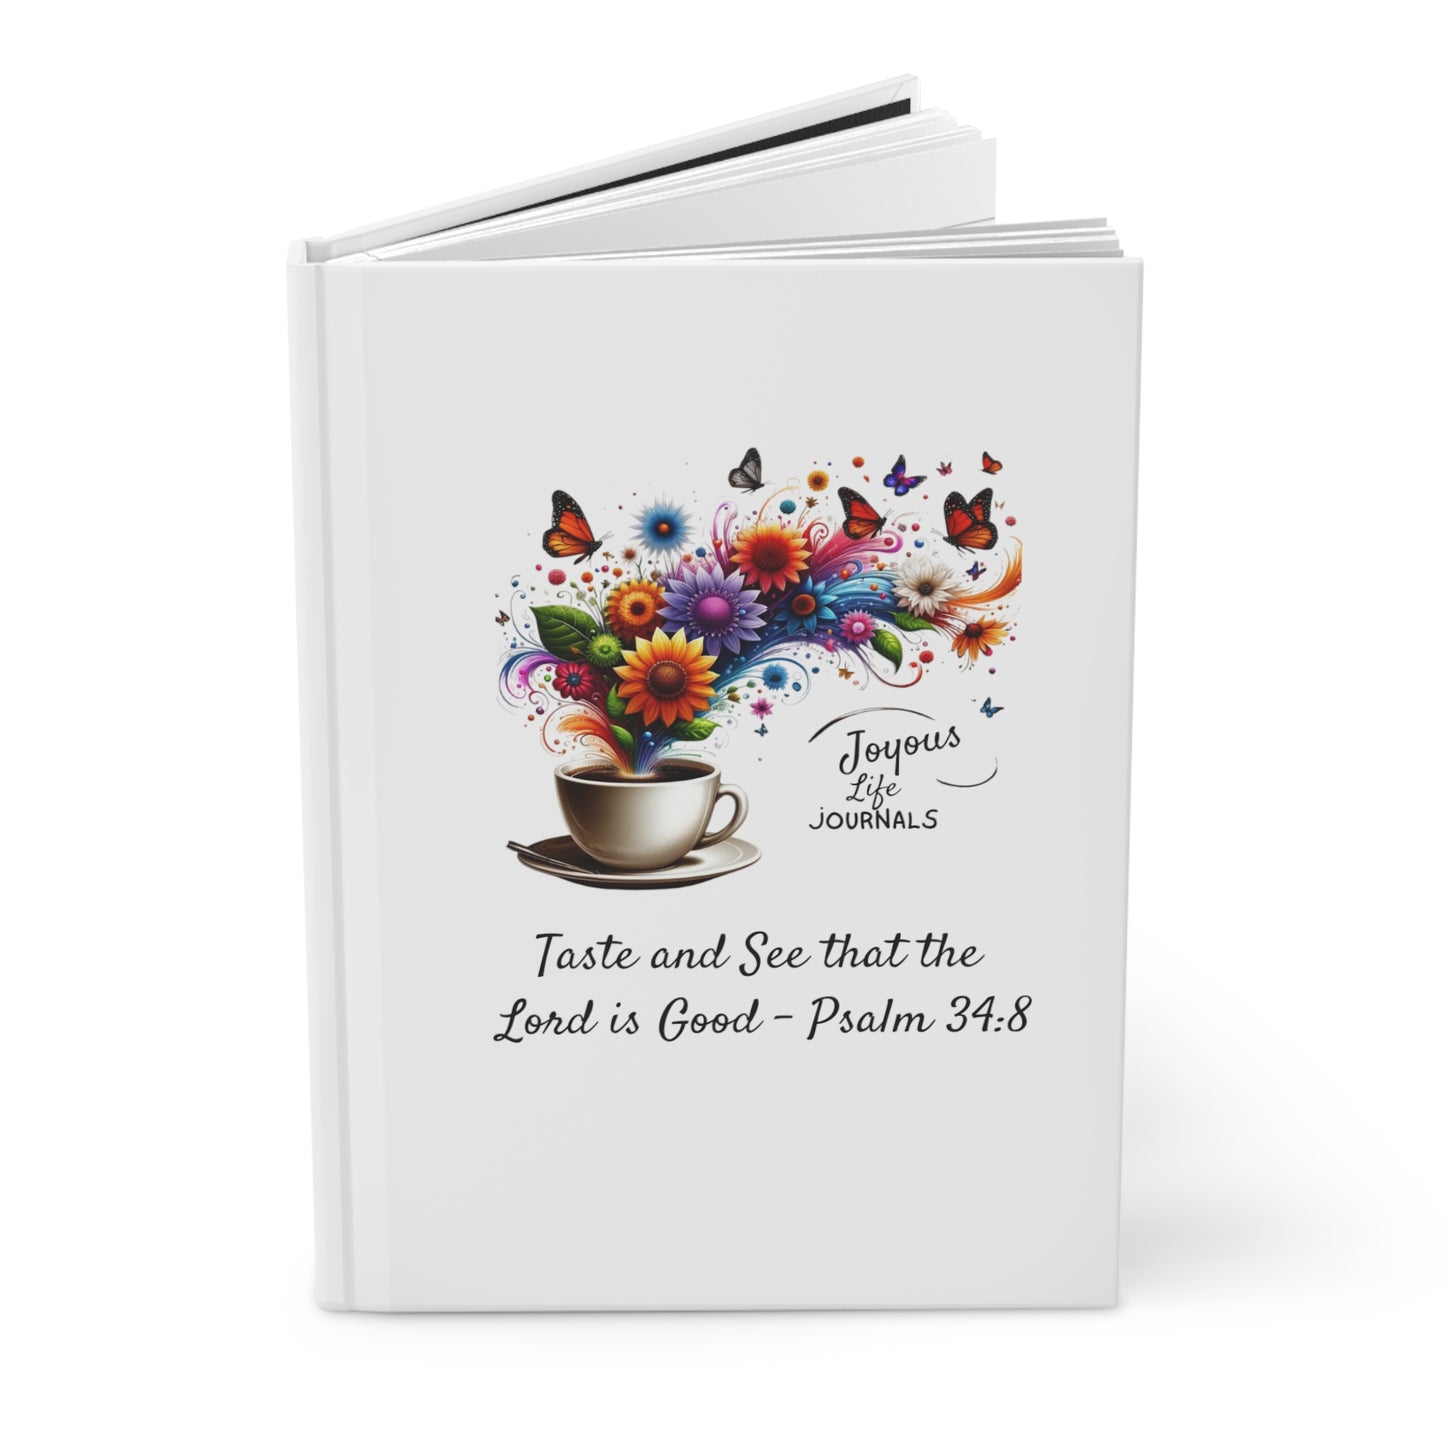 Savor the Scripture Taste and See that the Lord is Good - Psalm 34:8, Joyous Life Journals